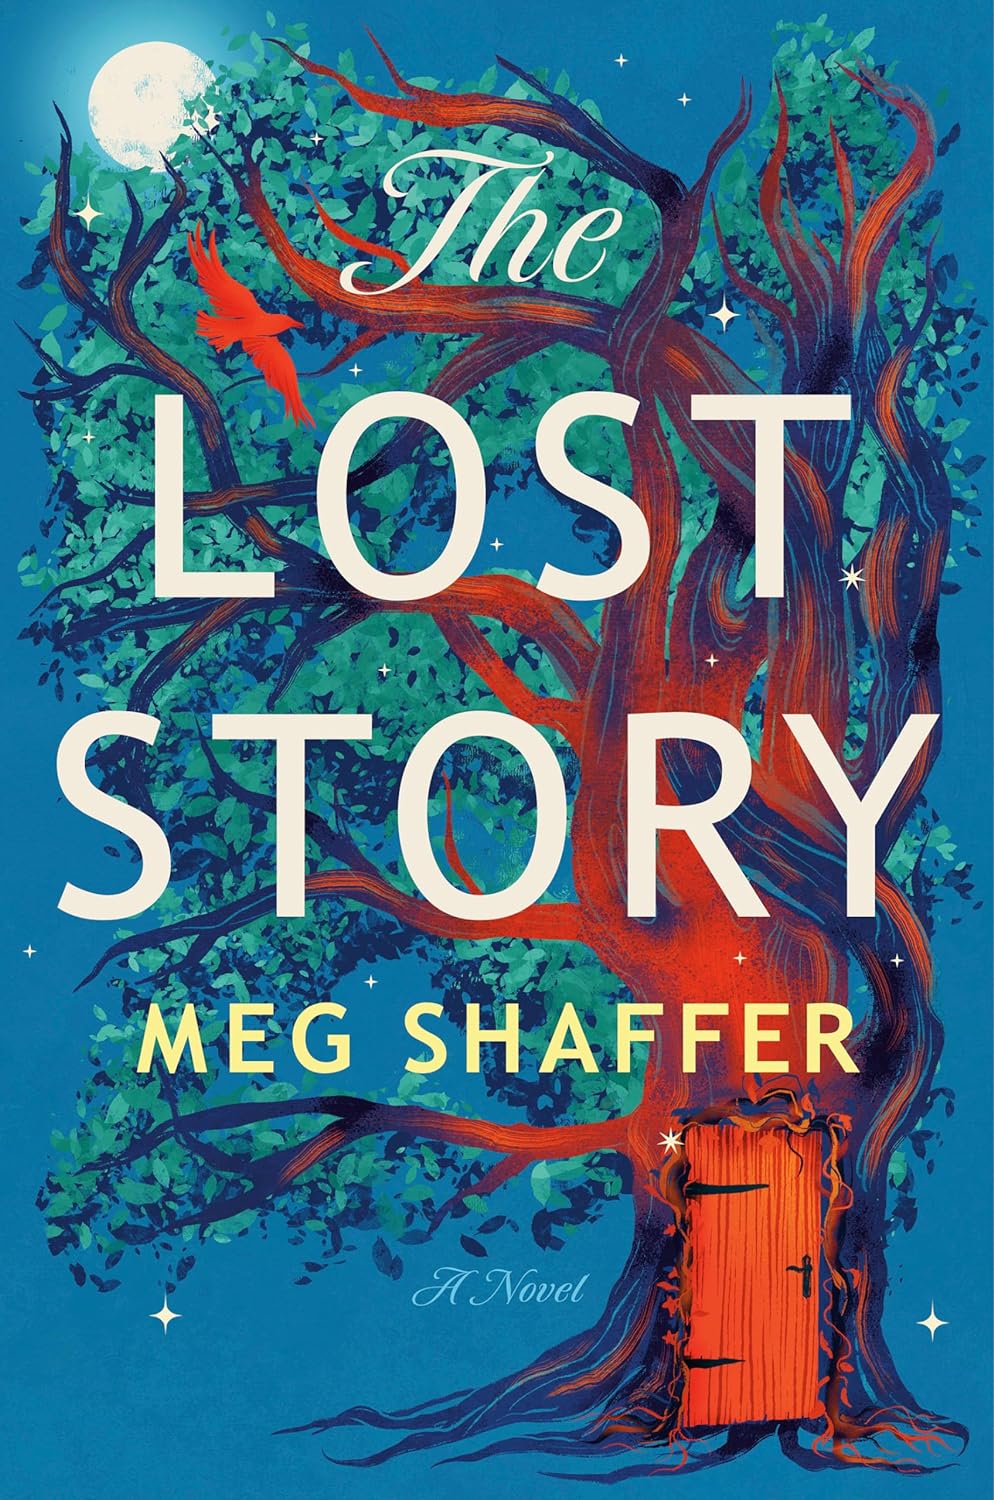 Book titled The Lost Story by Meg Shaffer